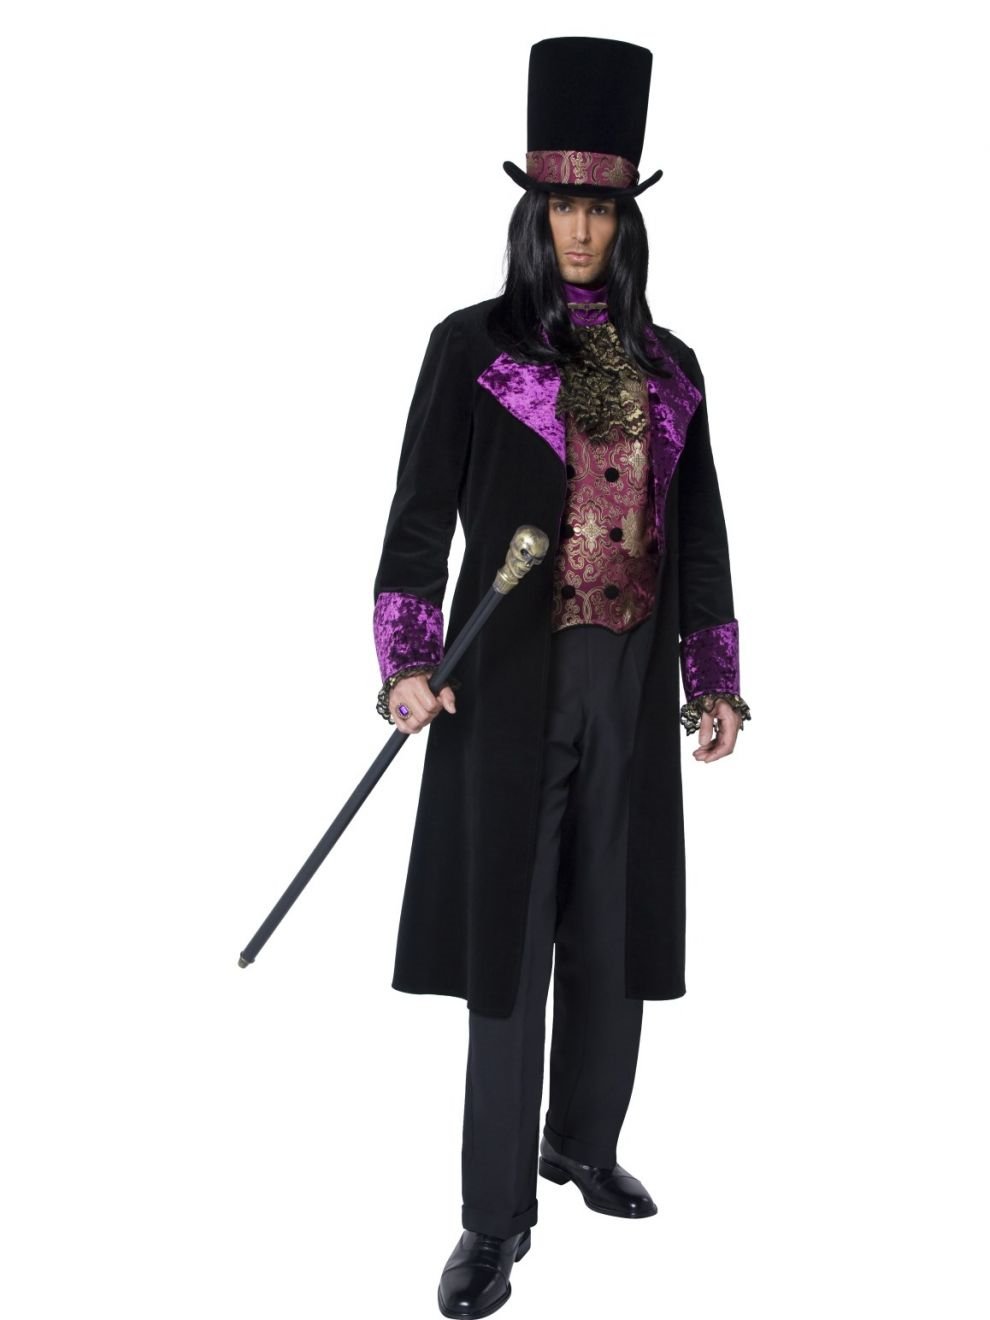 Costume Adult Gothic Count Size Large